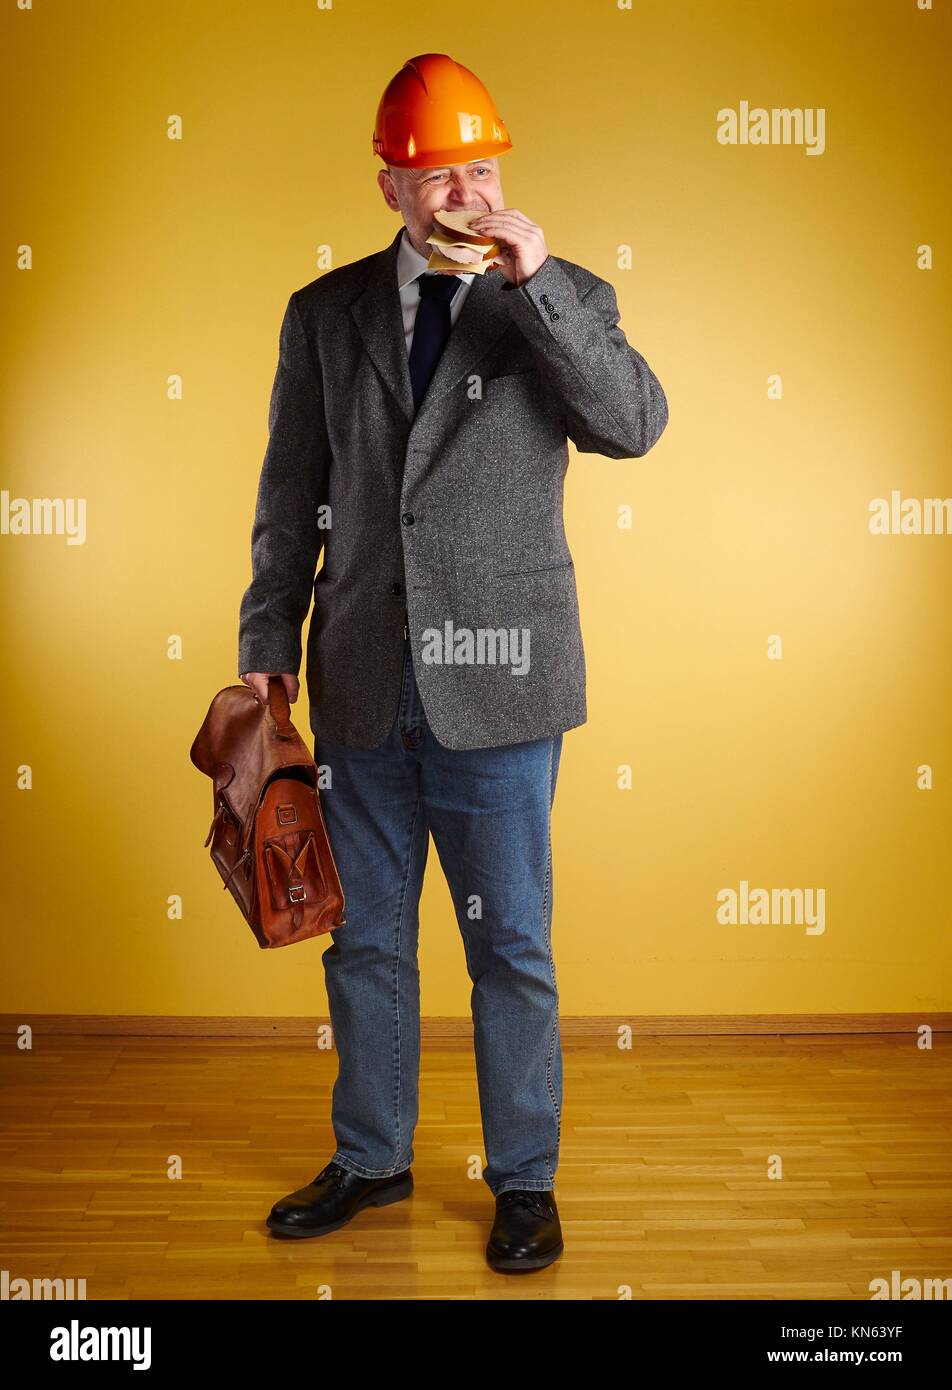 Male engineer in room, he eats sandwich and holds old leather briefcase, parquet floor and yellow wall. Stock Photo